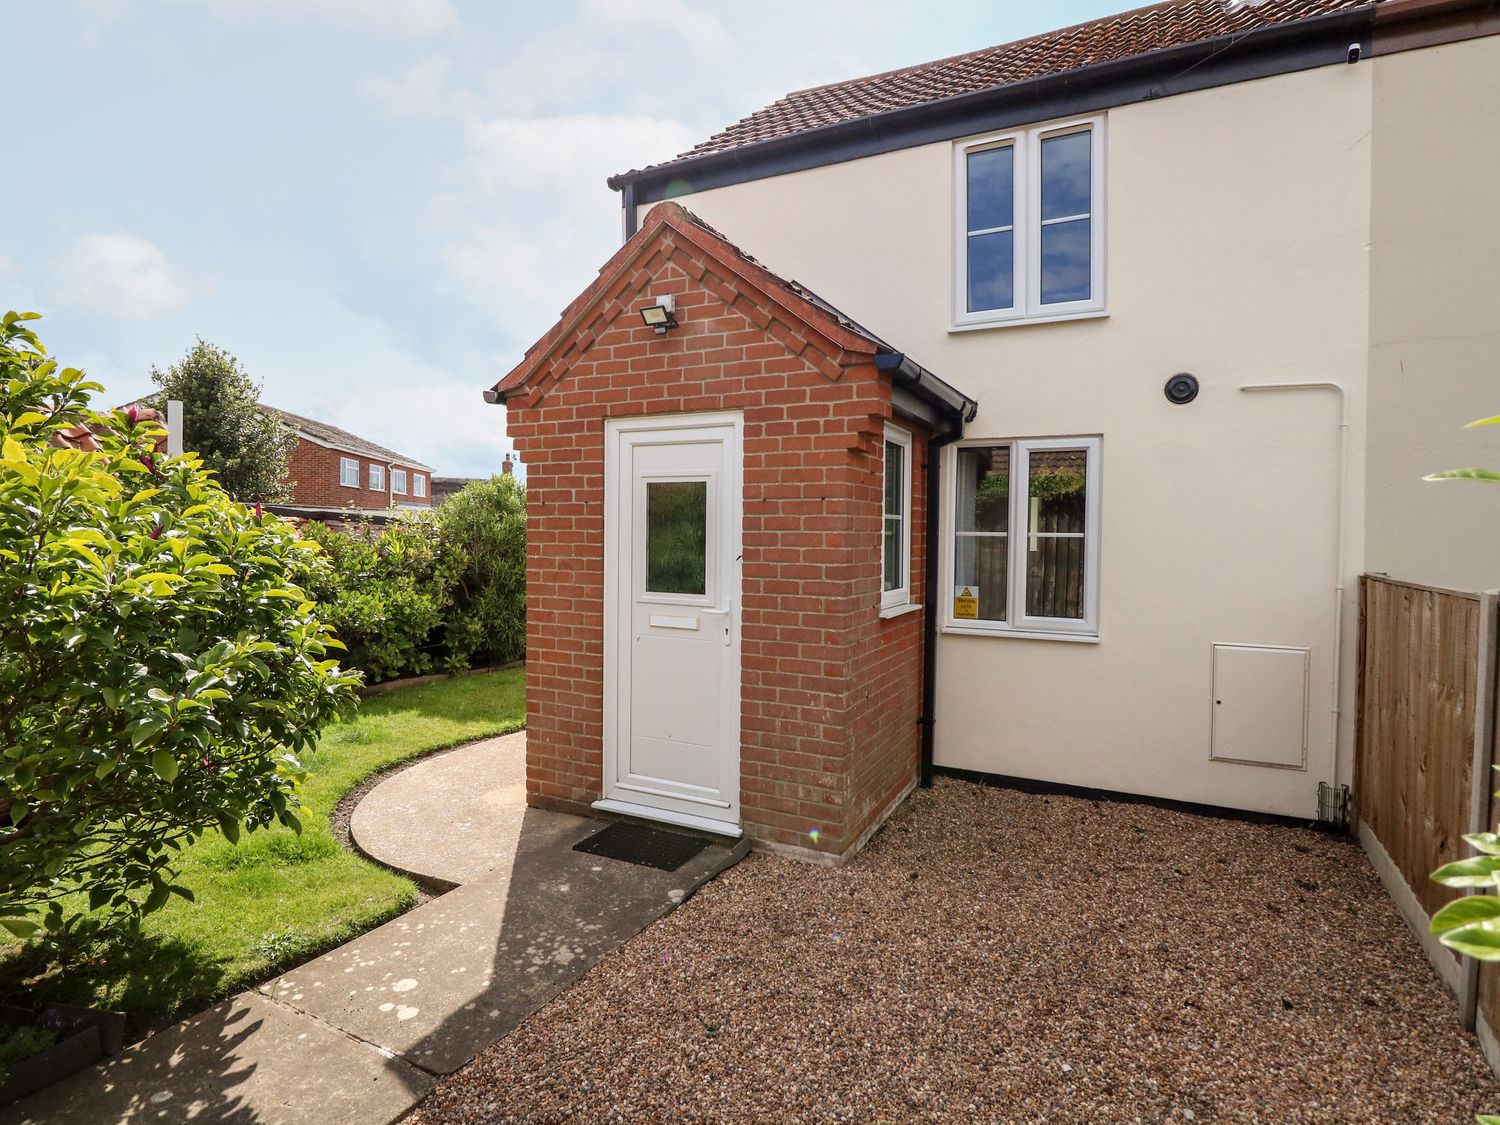 3 The Cottages - Norfolk - 1073481 - photo 1